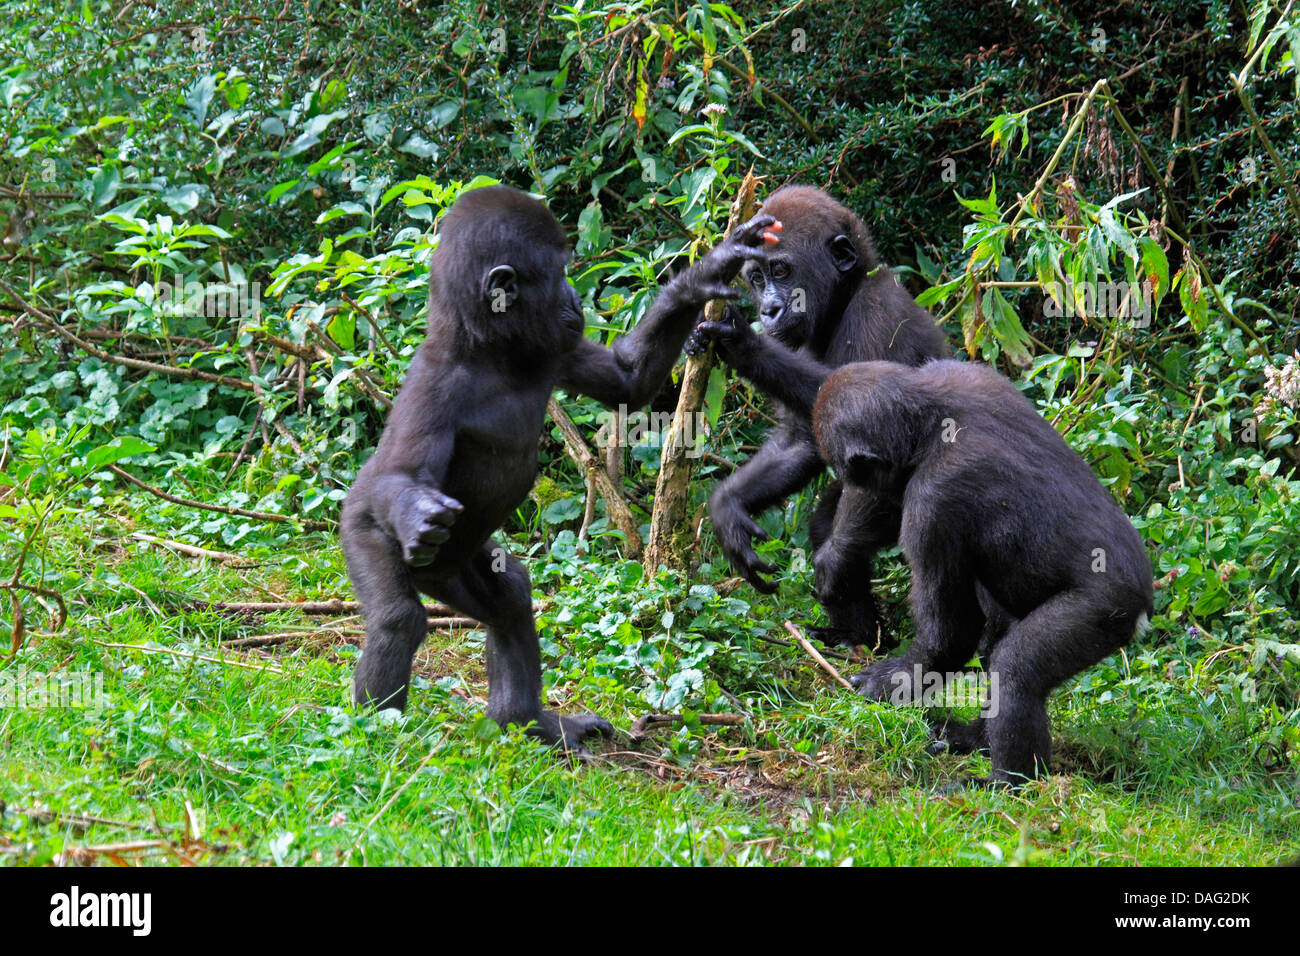 lowland gorilla (Gorilla gorilla gorilla), three juveniles playing in the grass Stock Photo